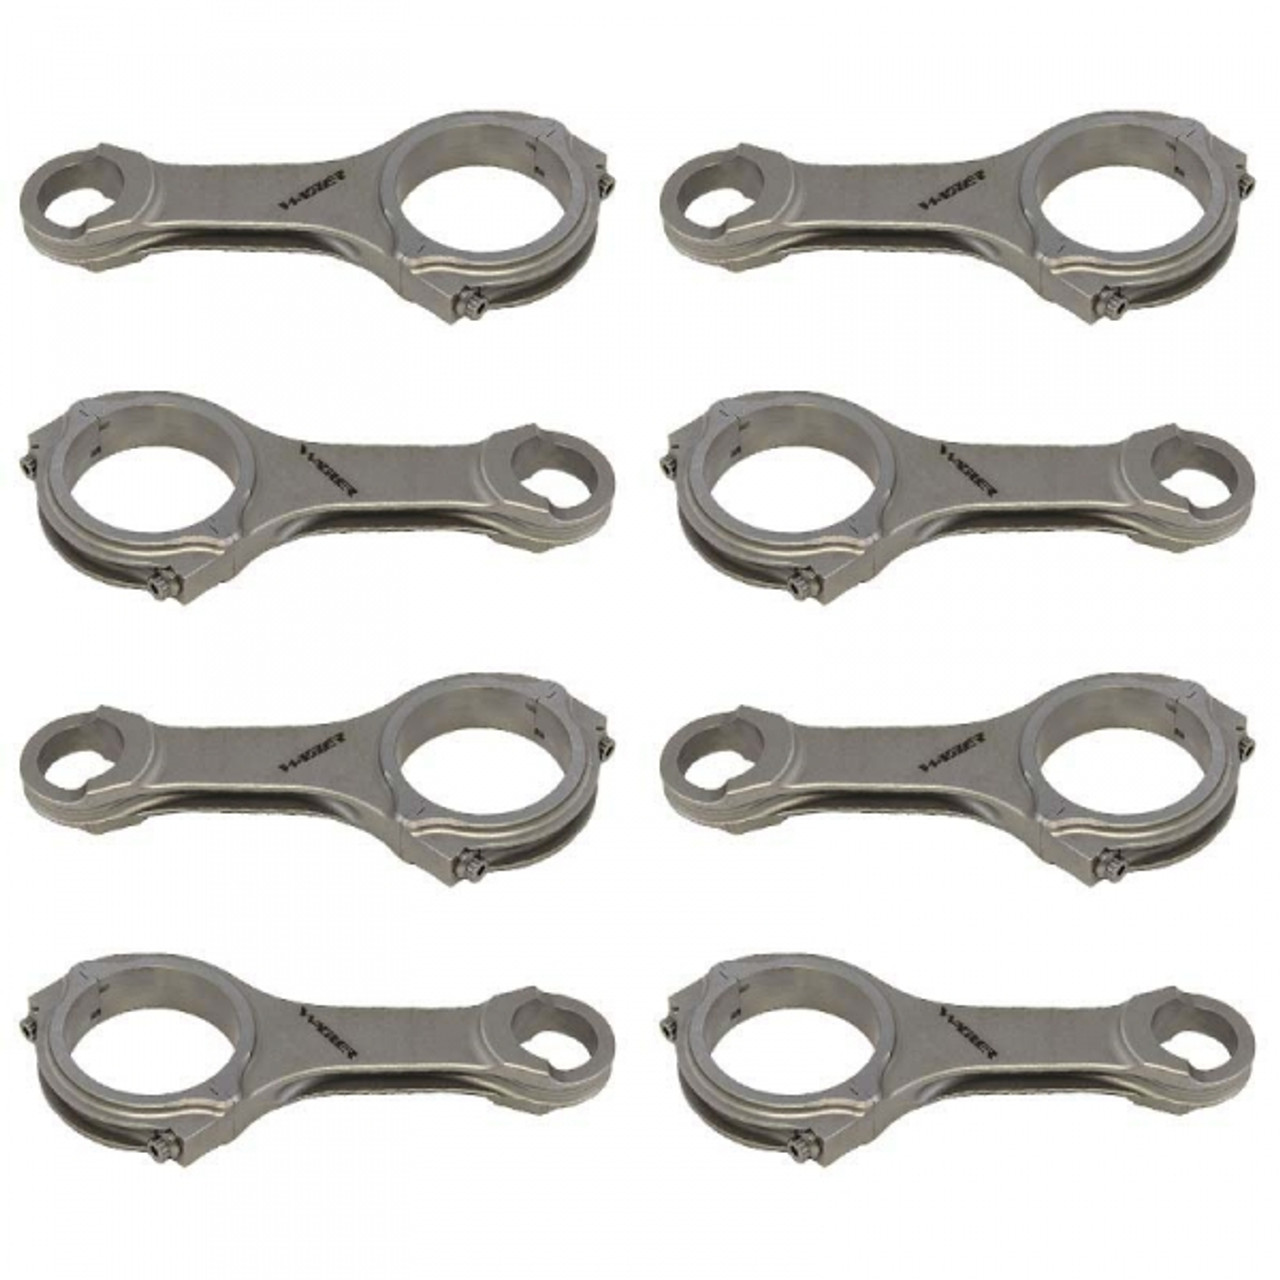 Wagler Connecting Rod Set 2011 to 2016 6.7L Powerstroke (Fits 34MM Wrist Pin) (WCPCRF6.7)Main View